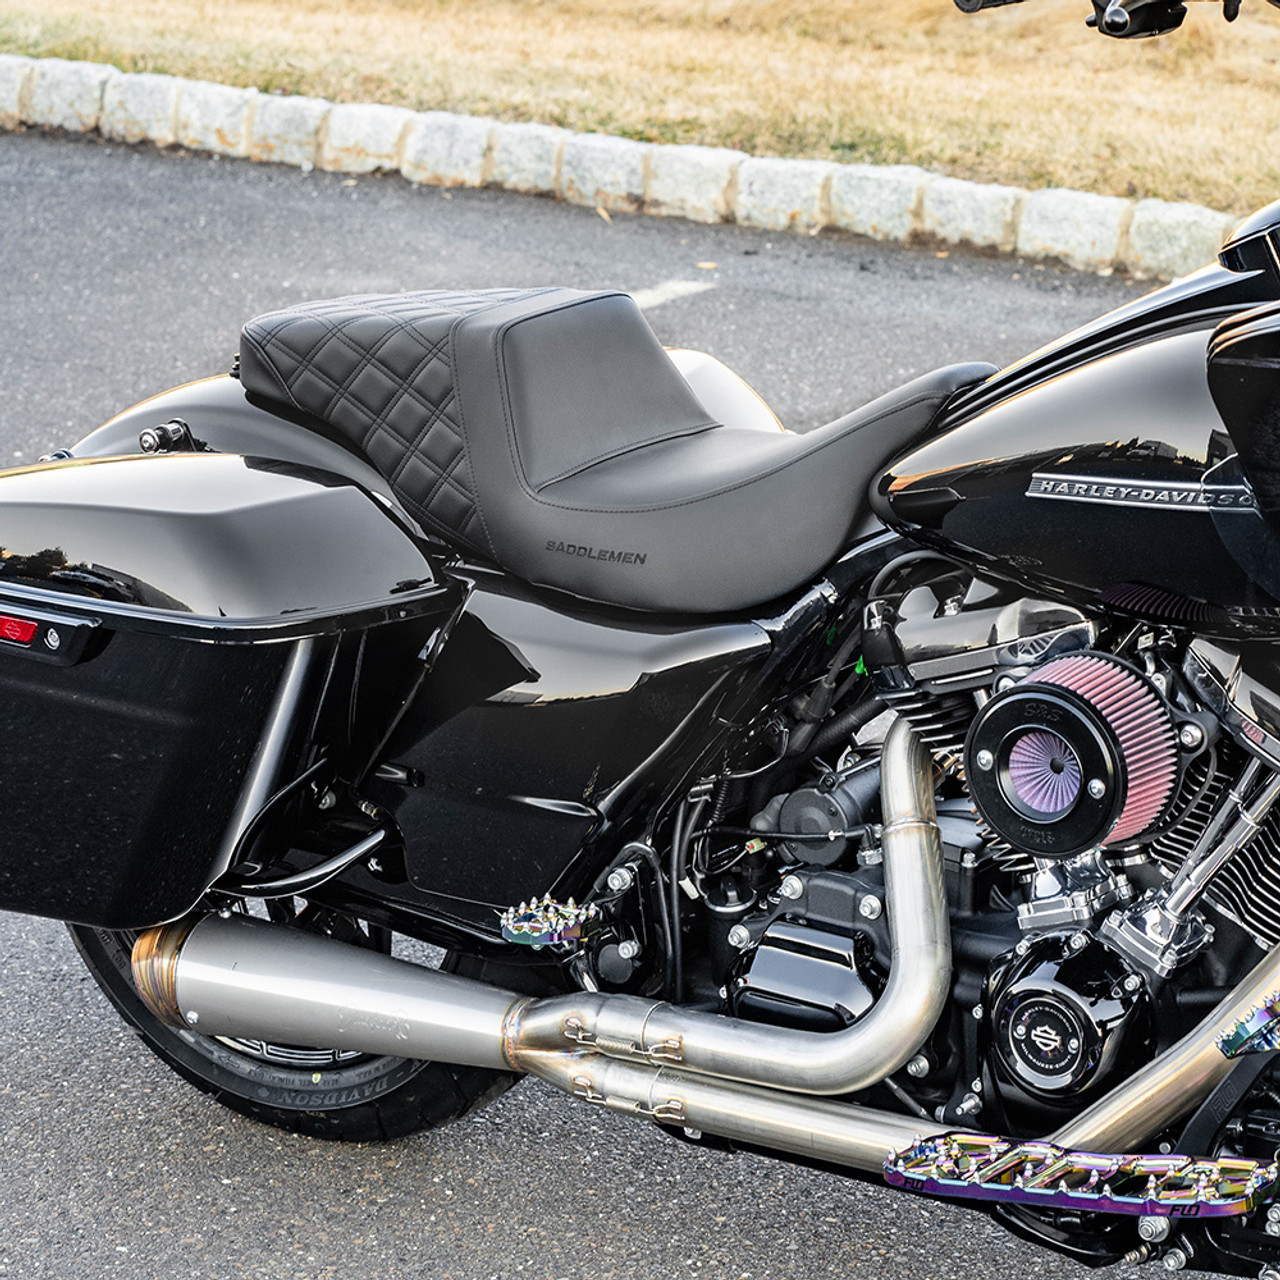 2022 Harley-Davidson Road Glide ST and Street Glide ST, Review